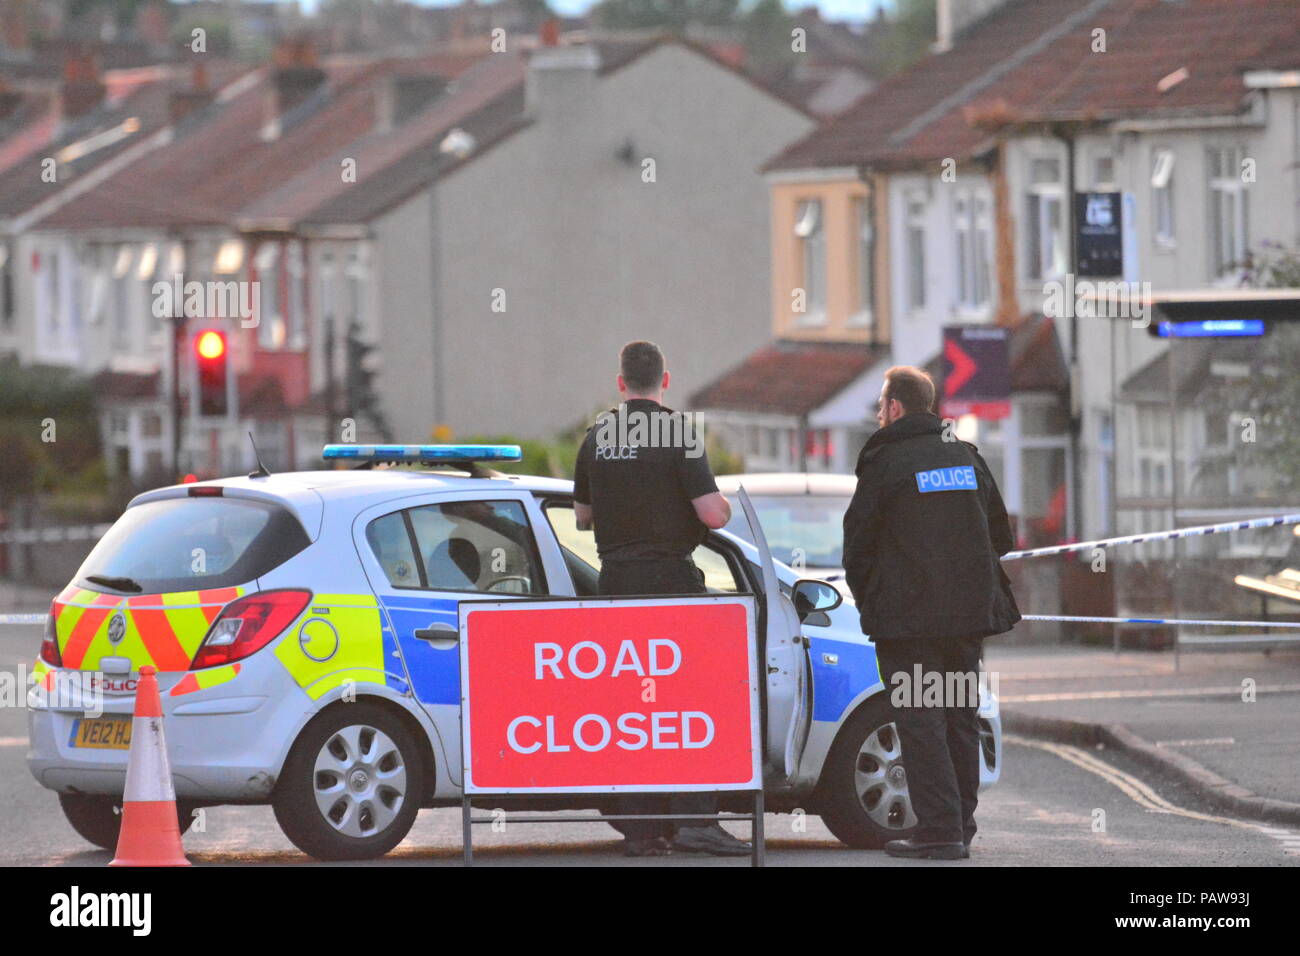 Filton Avenue, Bristol, UK. 25th July 2018. Bomb squad returned to a house that they went to on Monday and have now returned for a second time after a discovery in the loft of more suspicious items.residents were evacuated on Monday and now asked again to evacuate while road closed last night and is still closed this morning. A local primary school has been set up for residents by Bristol City Council late on Tuesday night about 11pm although not known if any body is there.. Credit: Robert Timoney/Alamy Live News Stock Photo